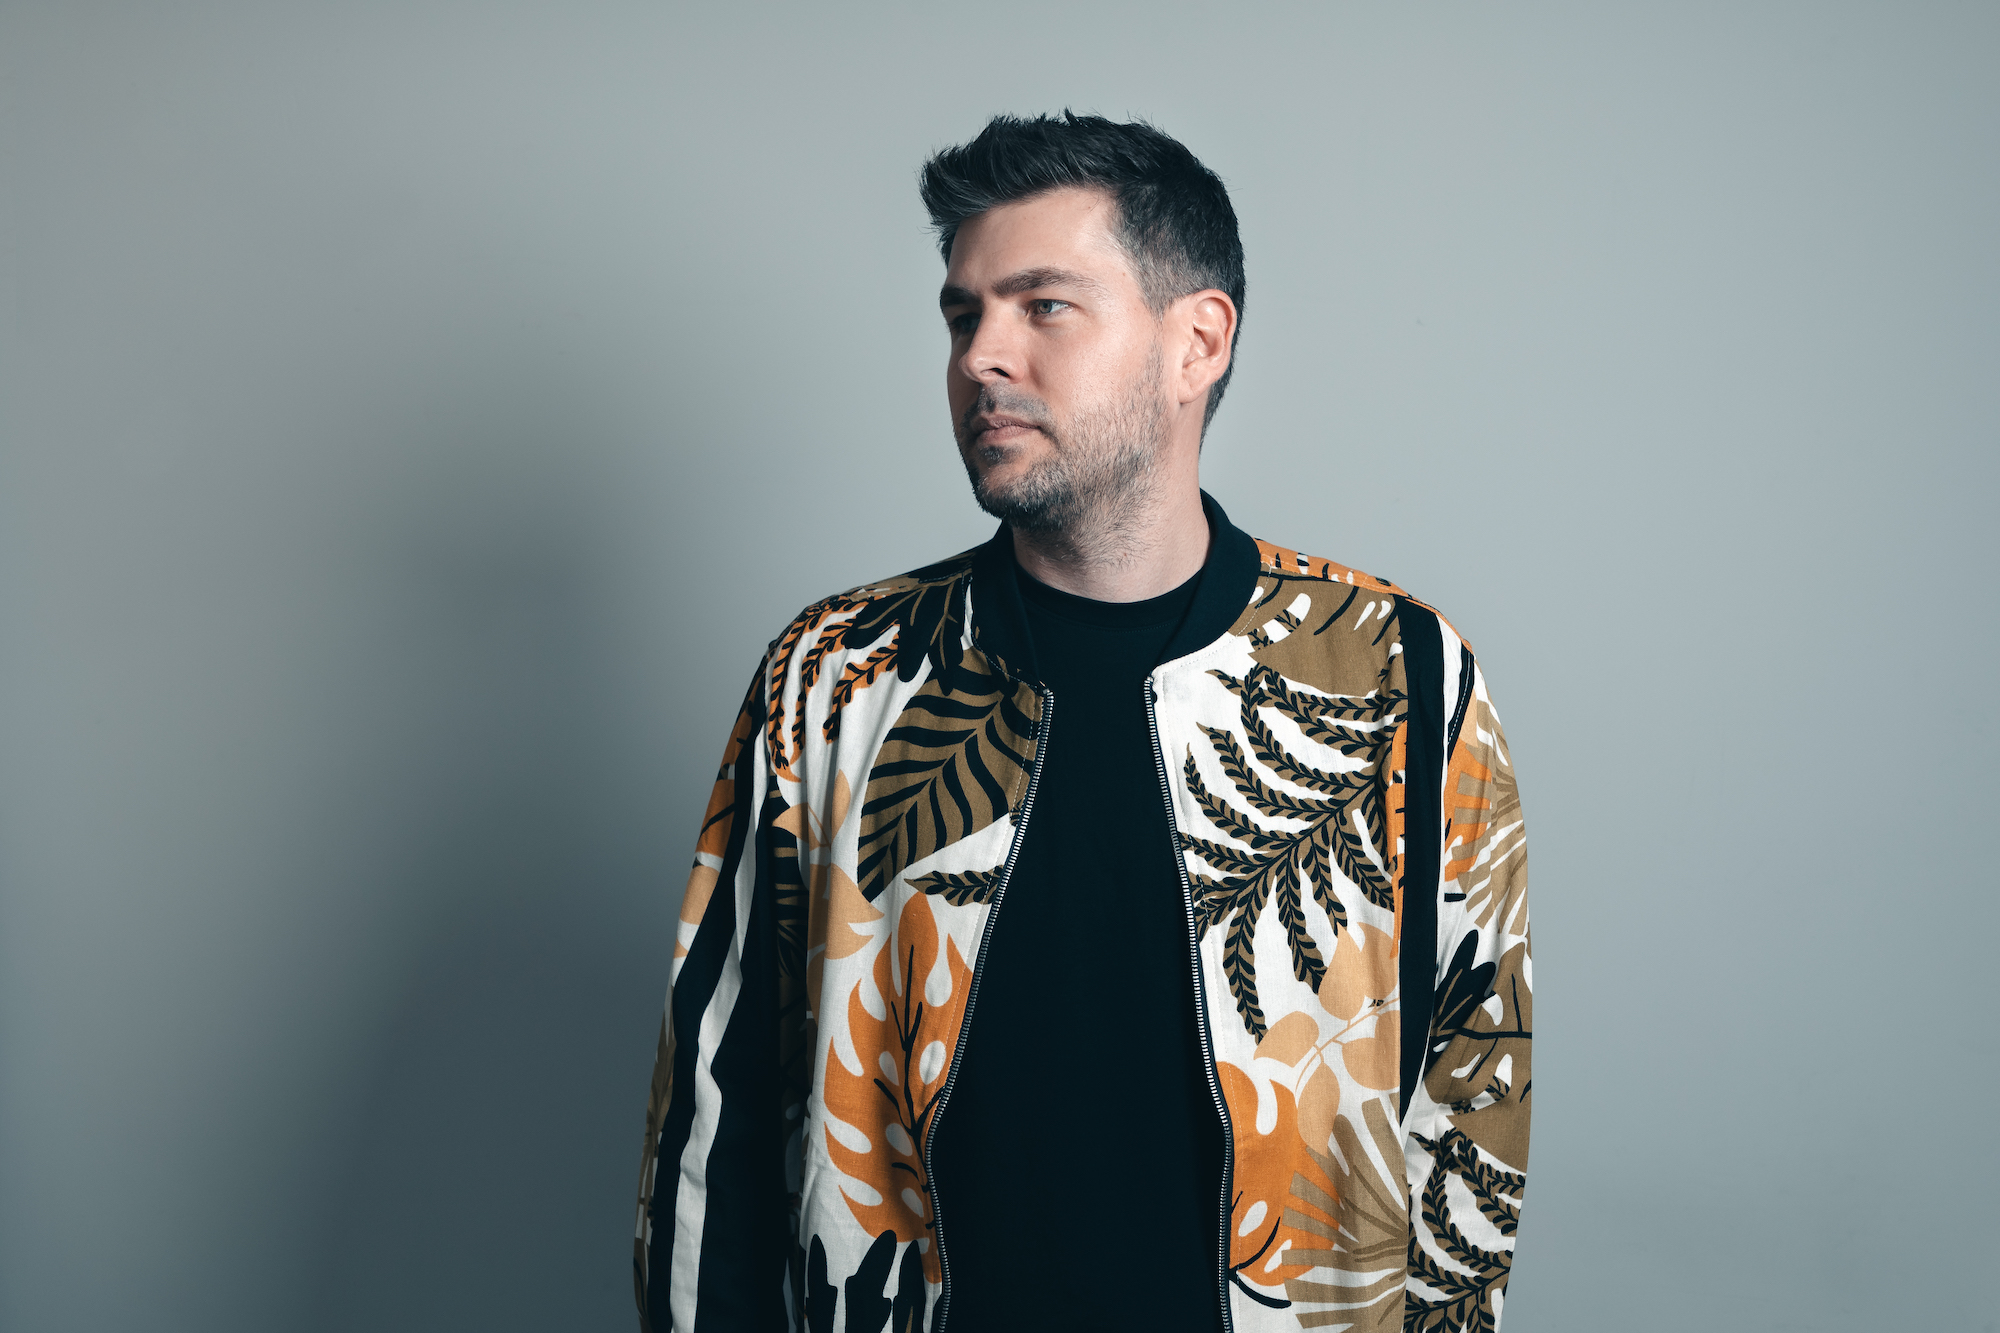 Kyle Watson Launches New Label No Context with Release of “Kick Drums”